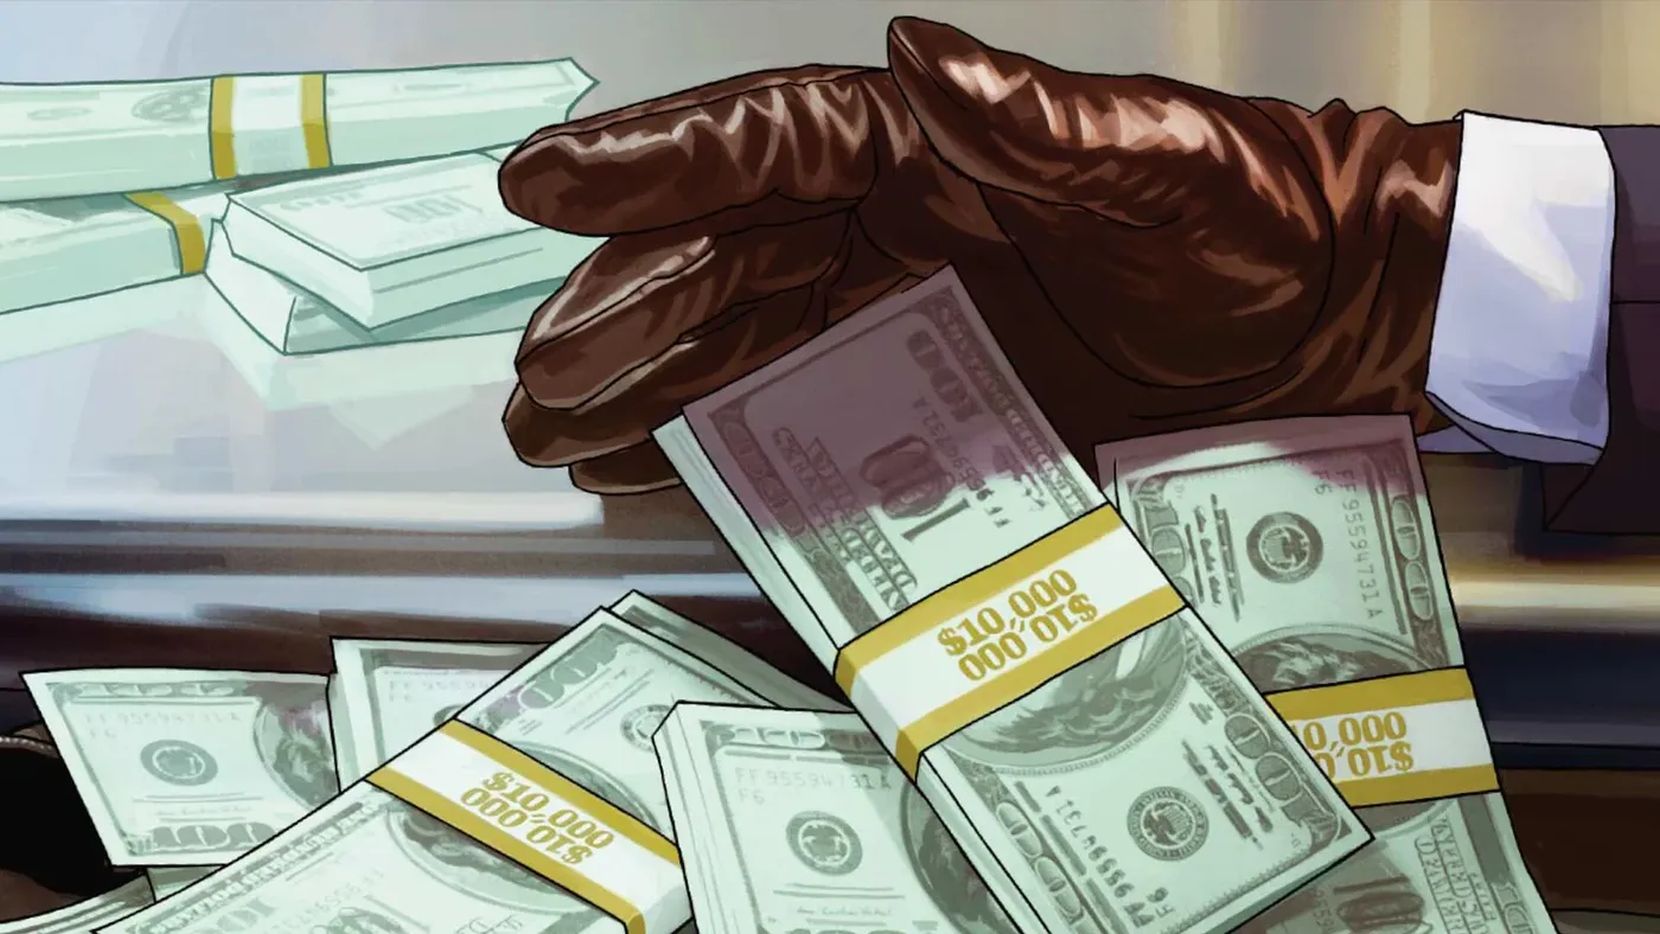 Image for GTA 5 just sold another 5 million copies as GTA: The Trilogy - The Definitive Edition fails to stay relevant